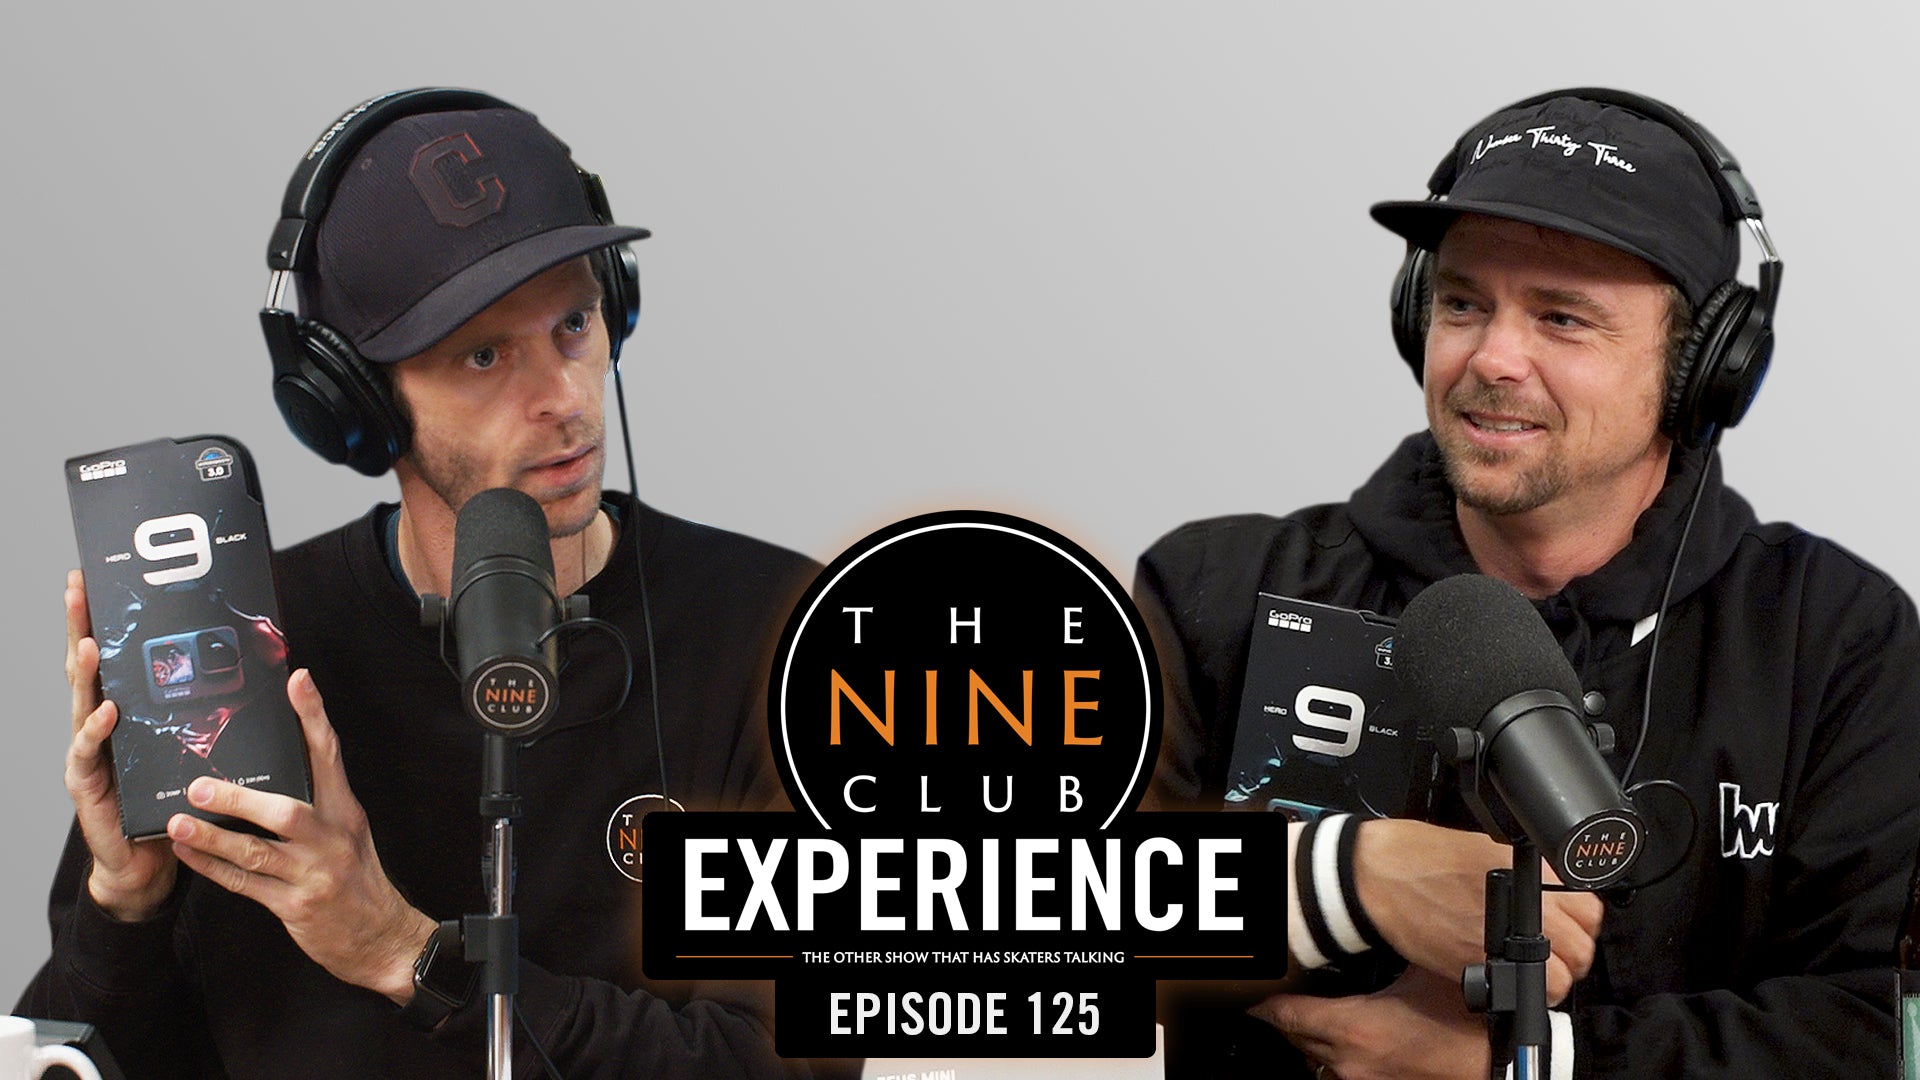 The Nine Club Experience Episode 125